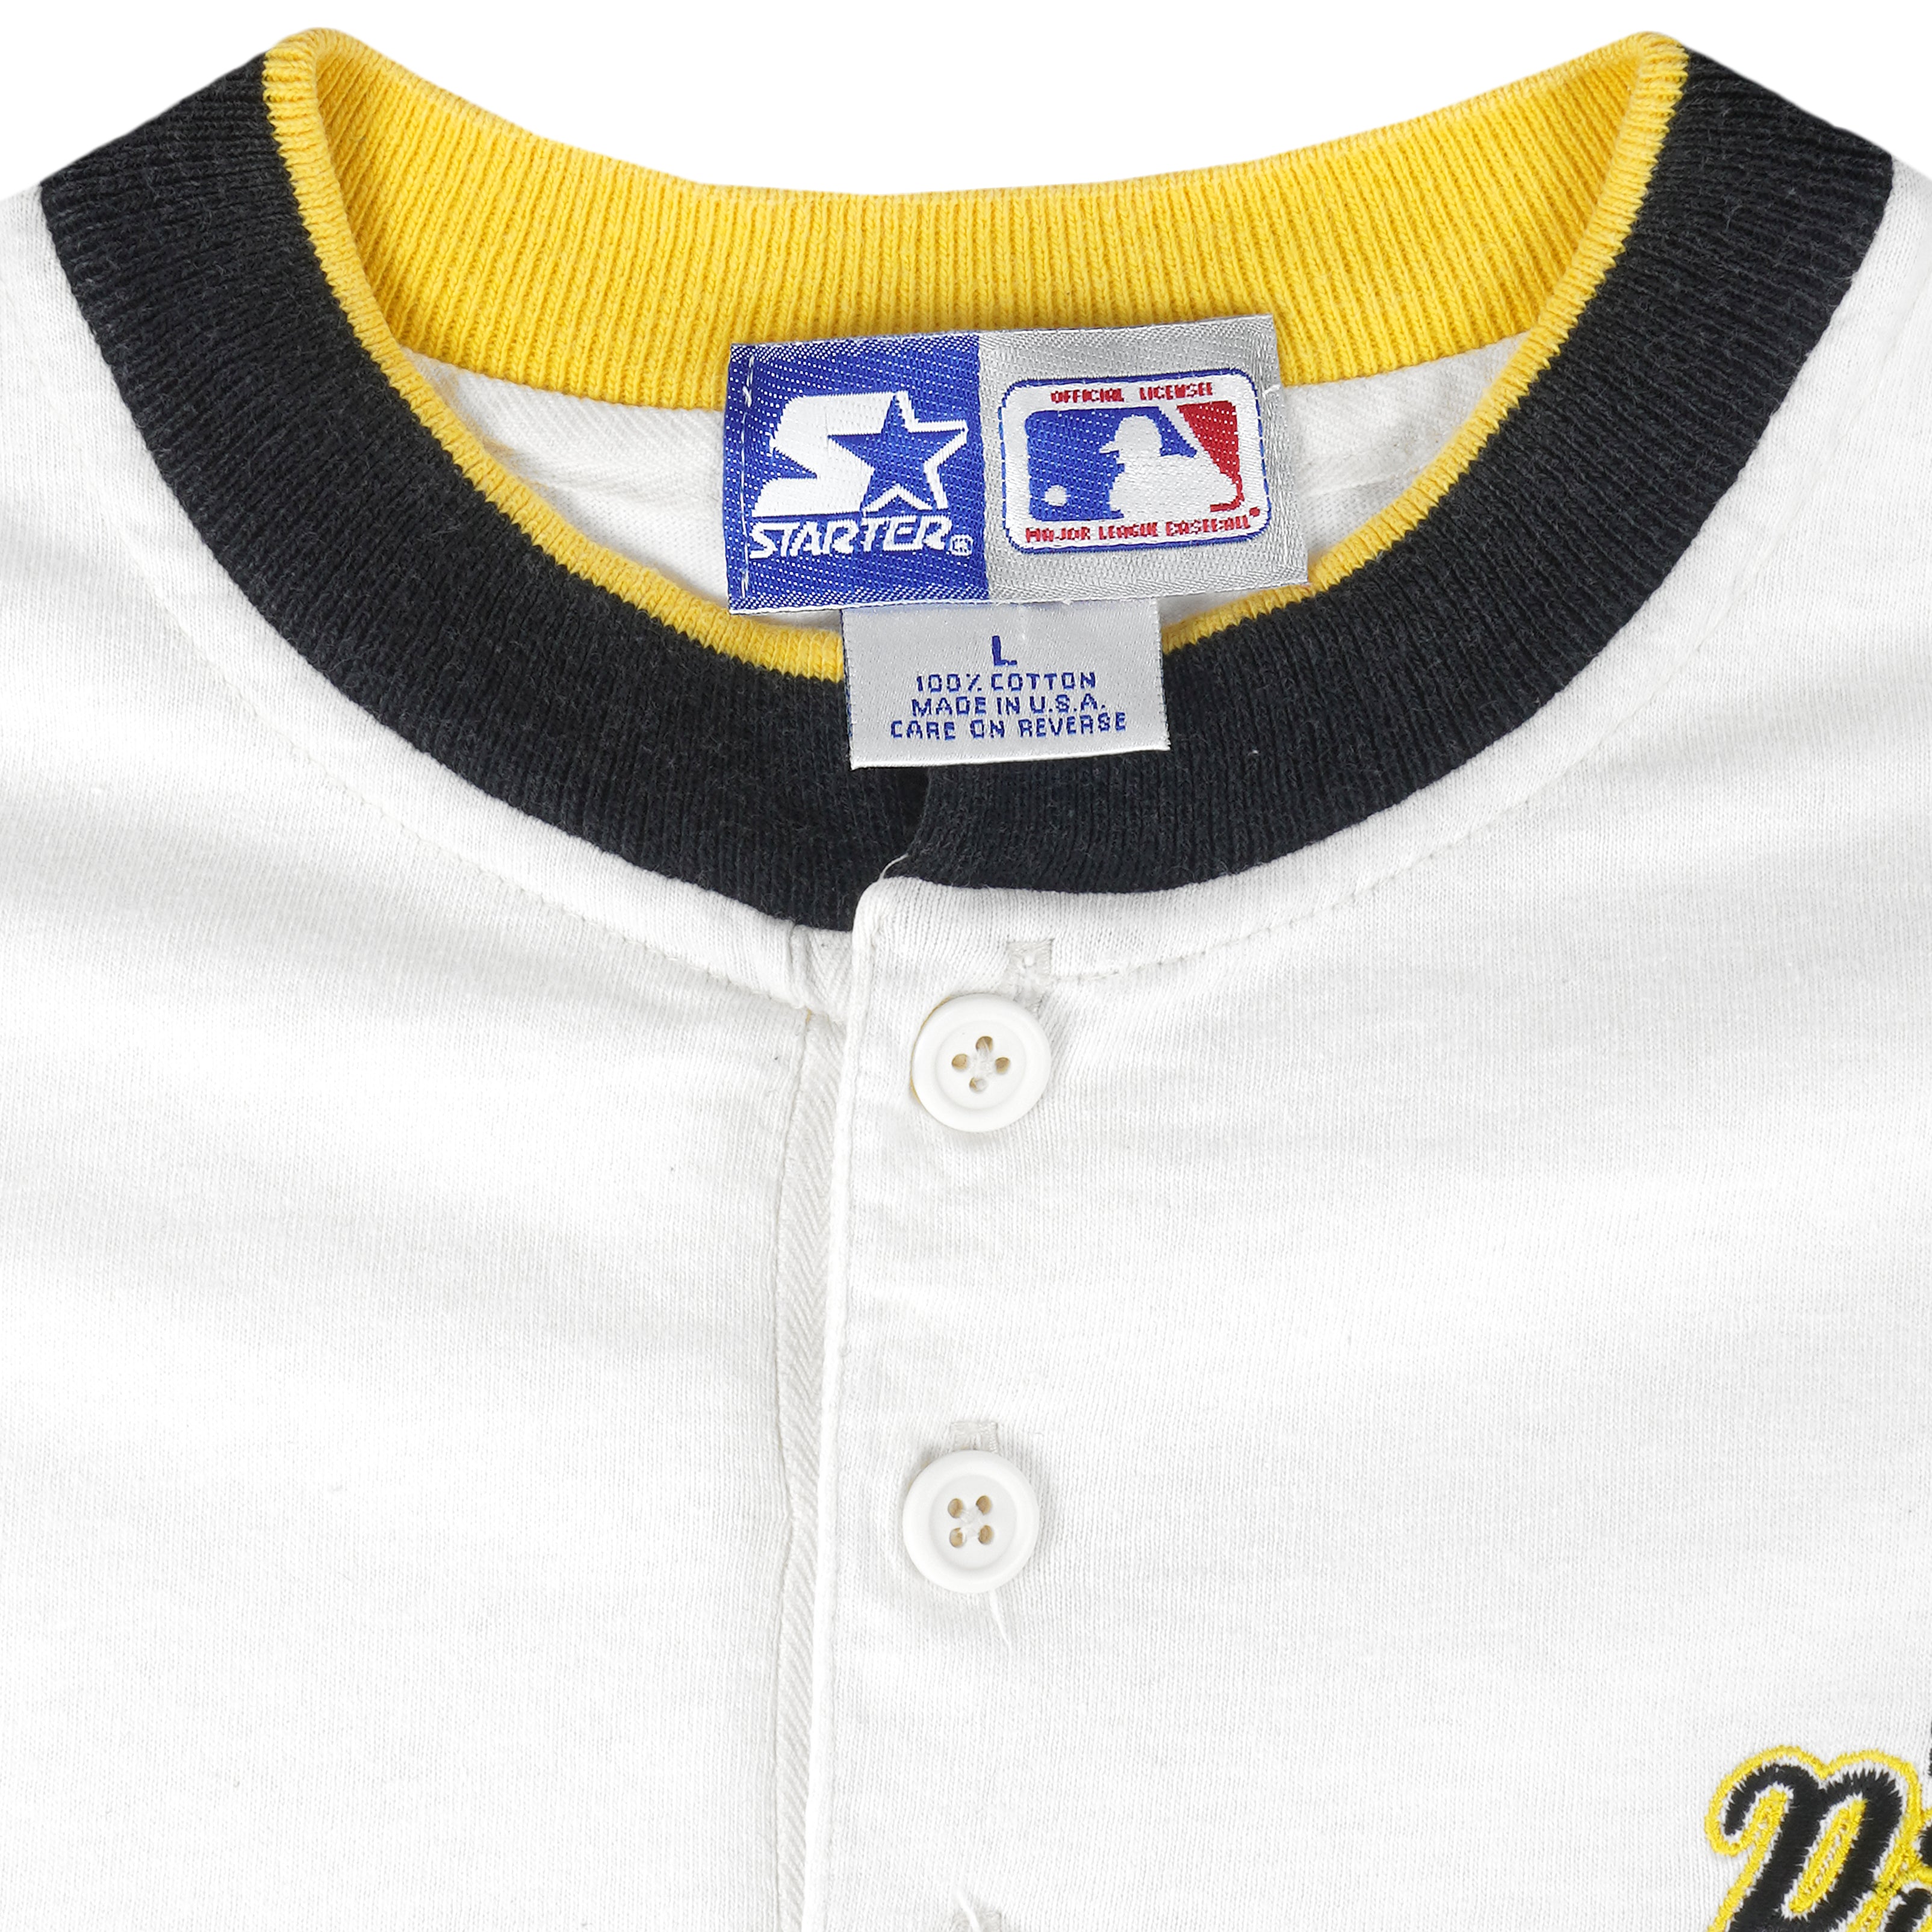 90s Pittsburgh Pirates Uniforms Embroidered t-shirt Medium - The